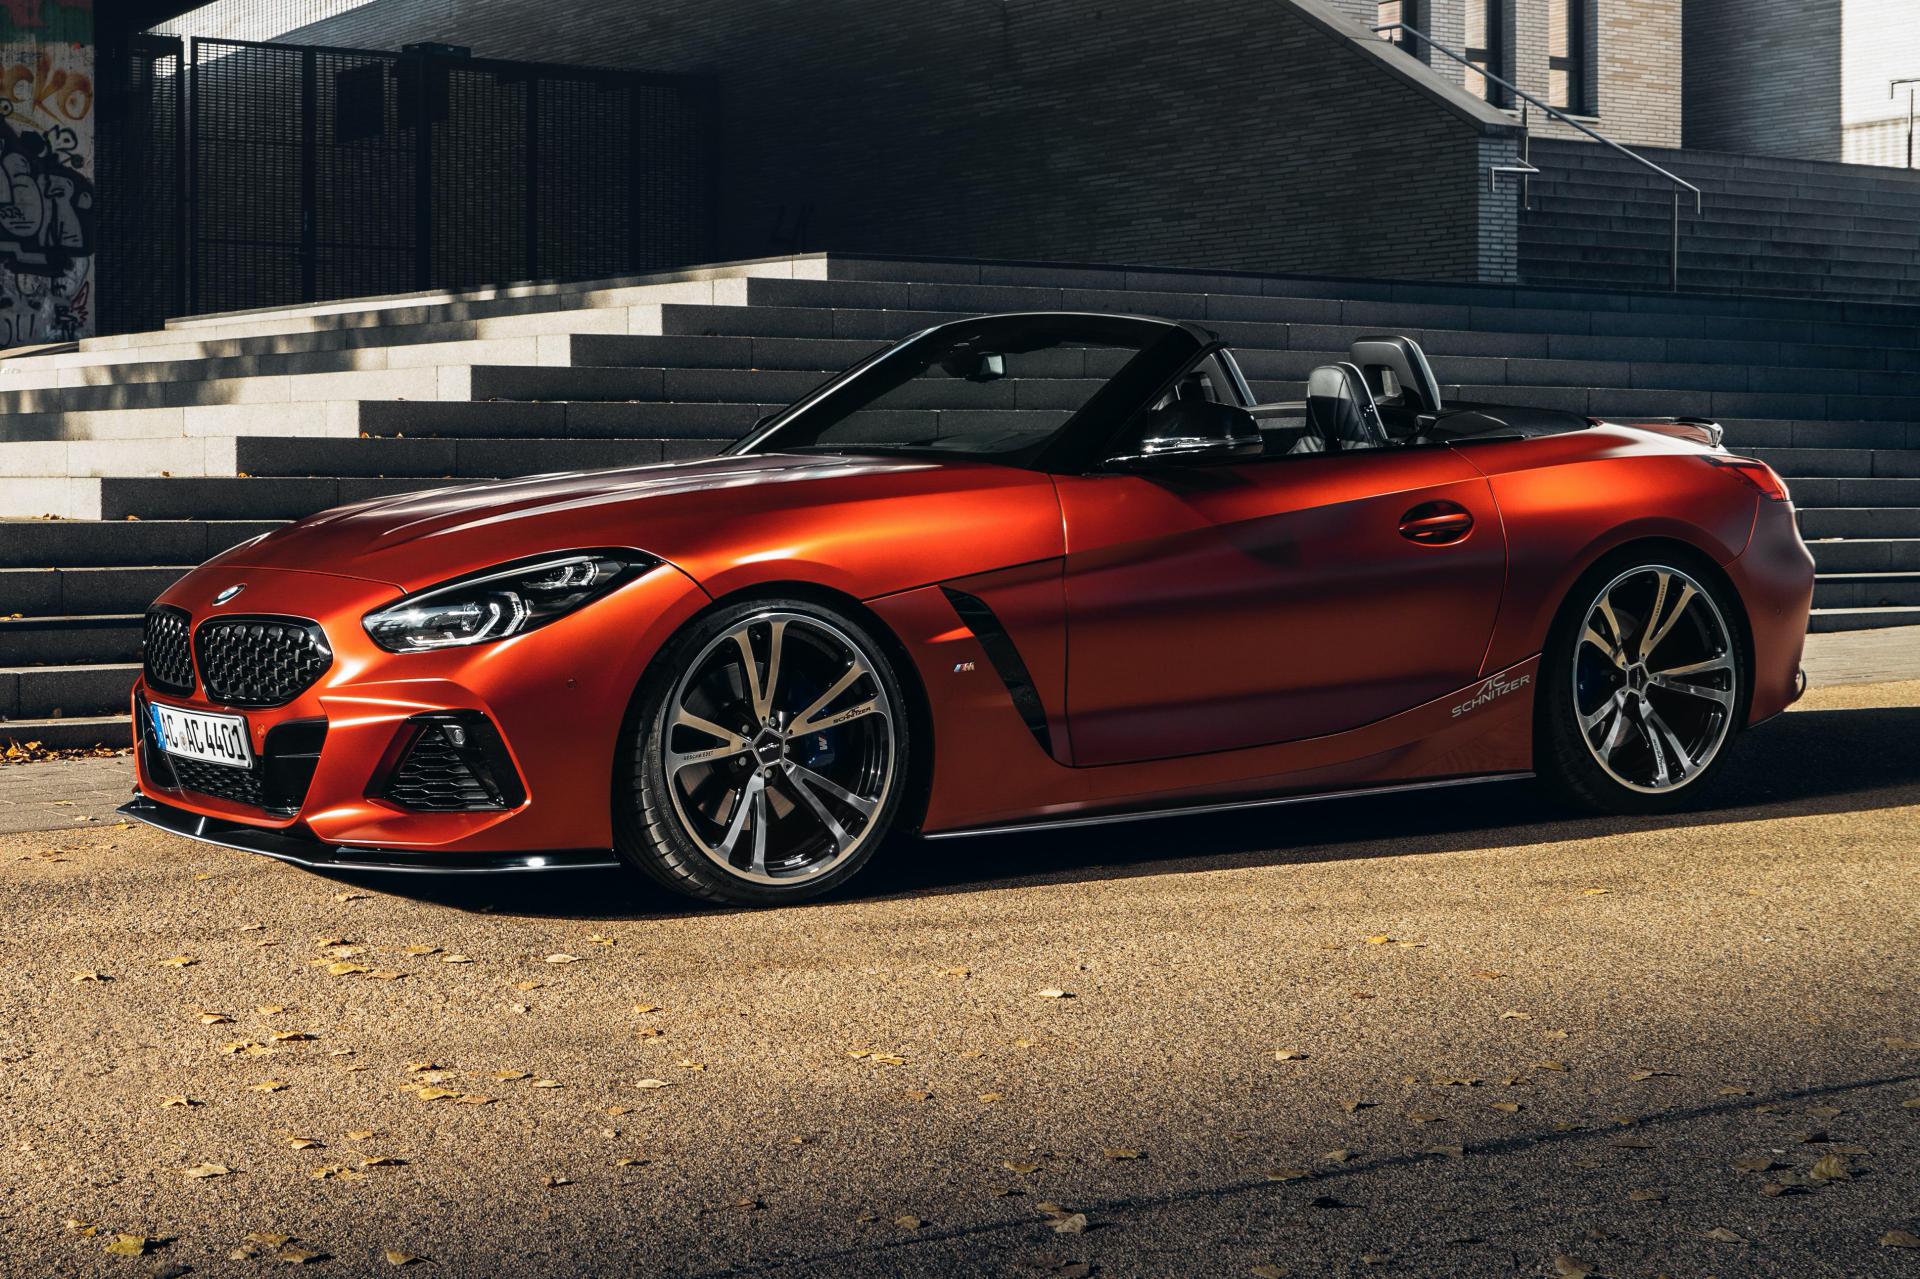 Ac Schnitzer Boosts Bmw Z4 M40i To 400 Ps Sharpens Its Handling And Looks Too Carscoops